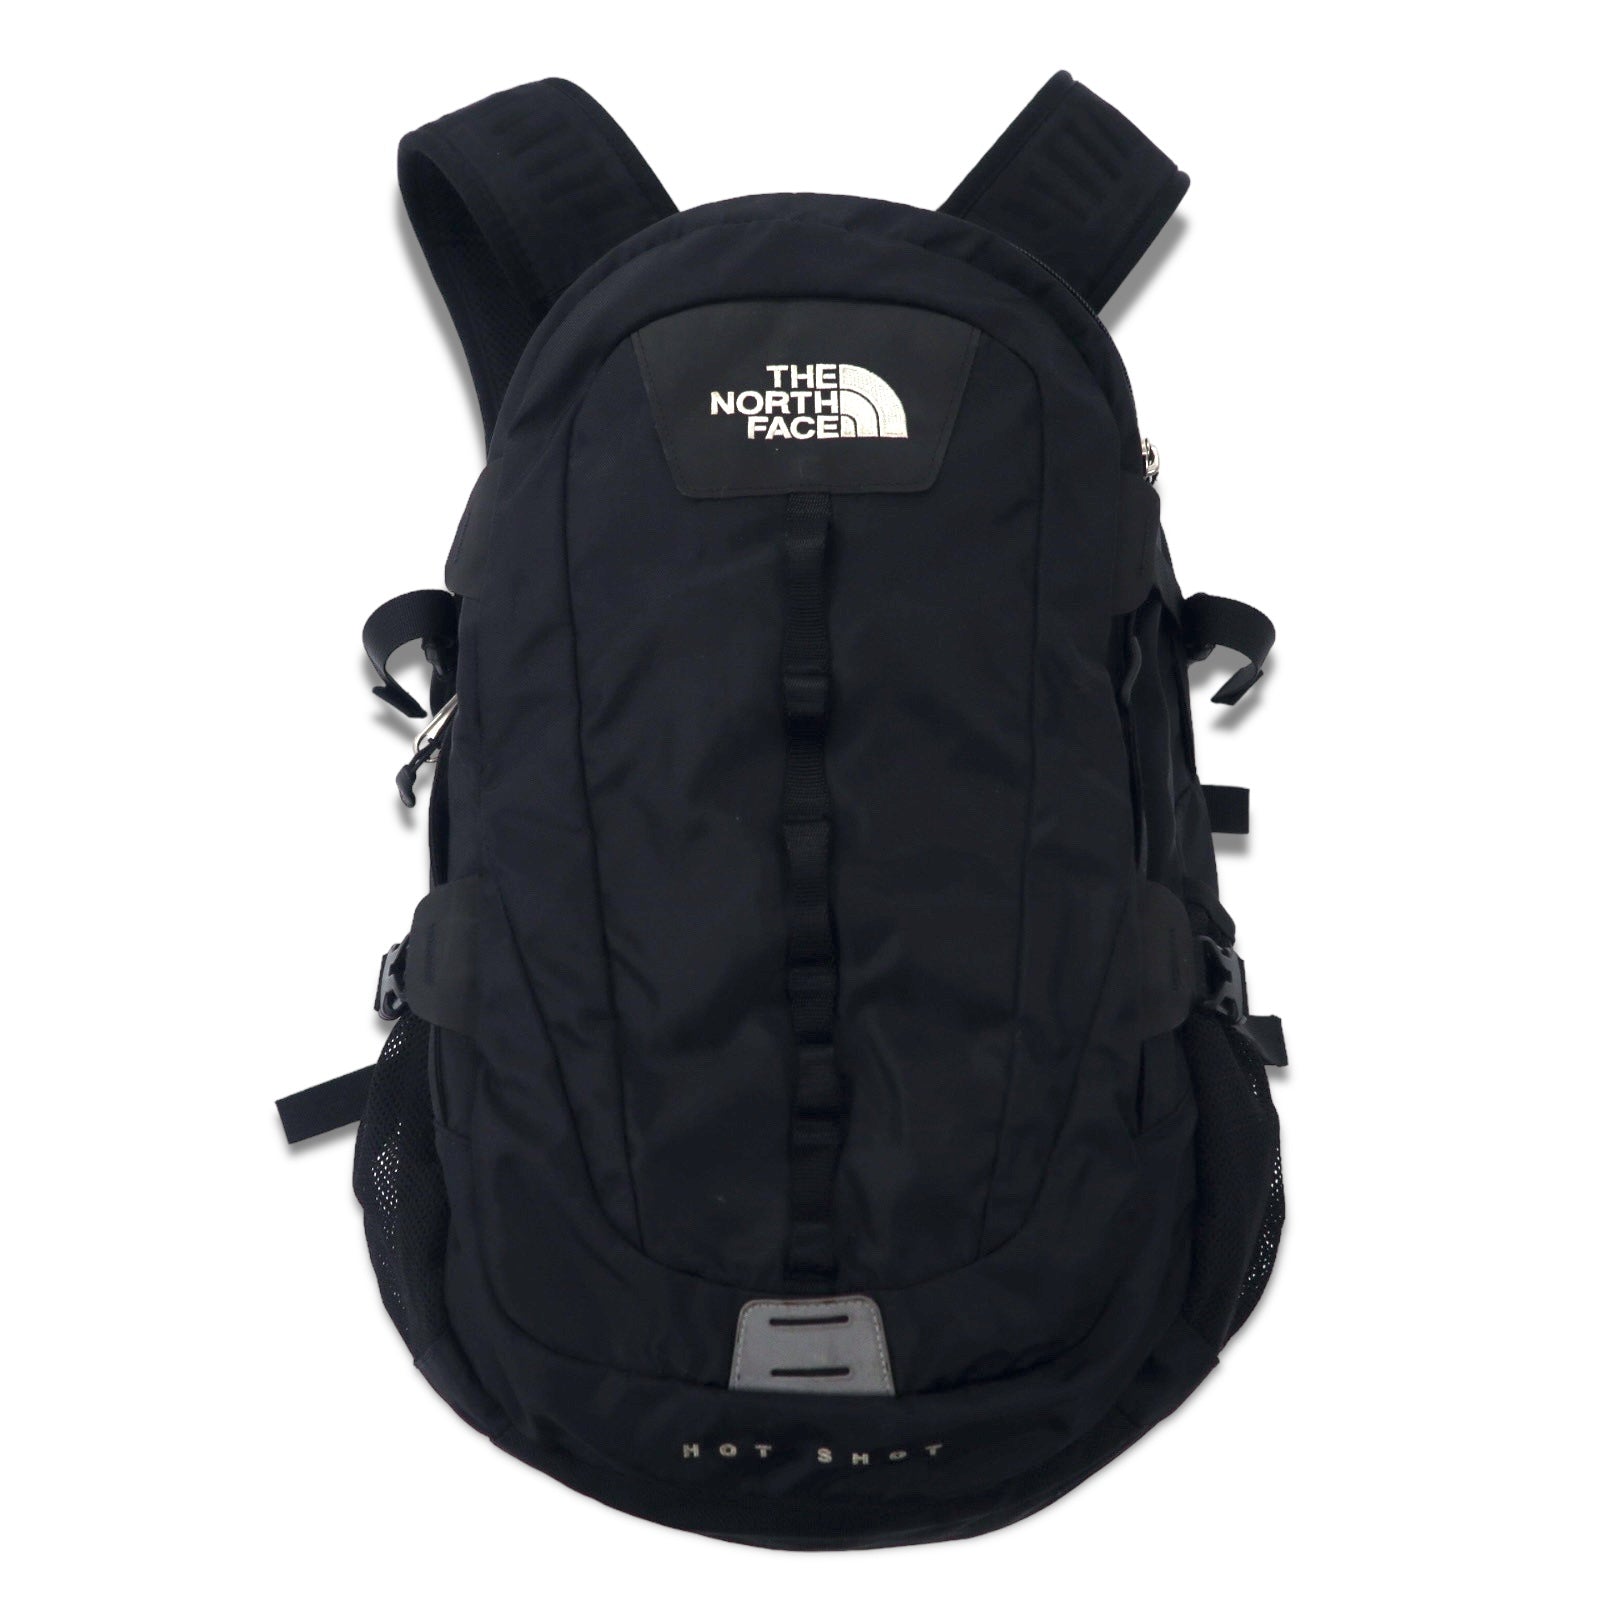 THE NORTH FACE ホットショット バックパック リュックサック 26L 